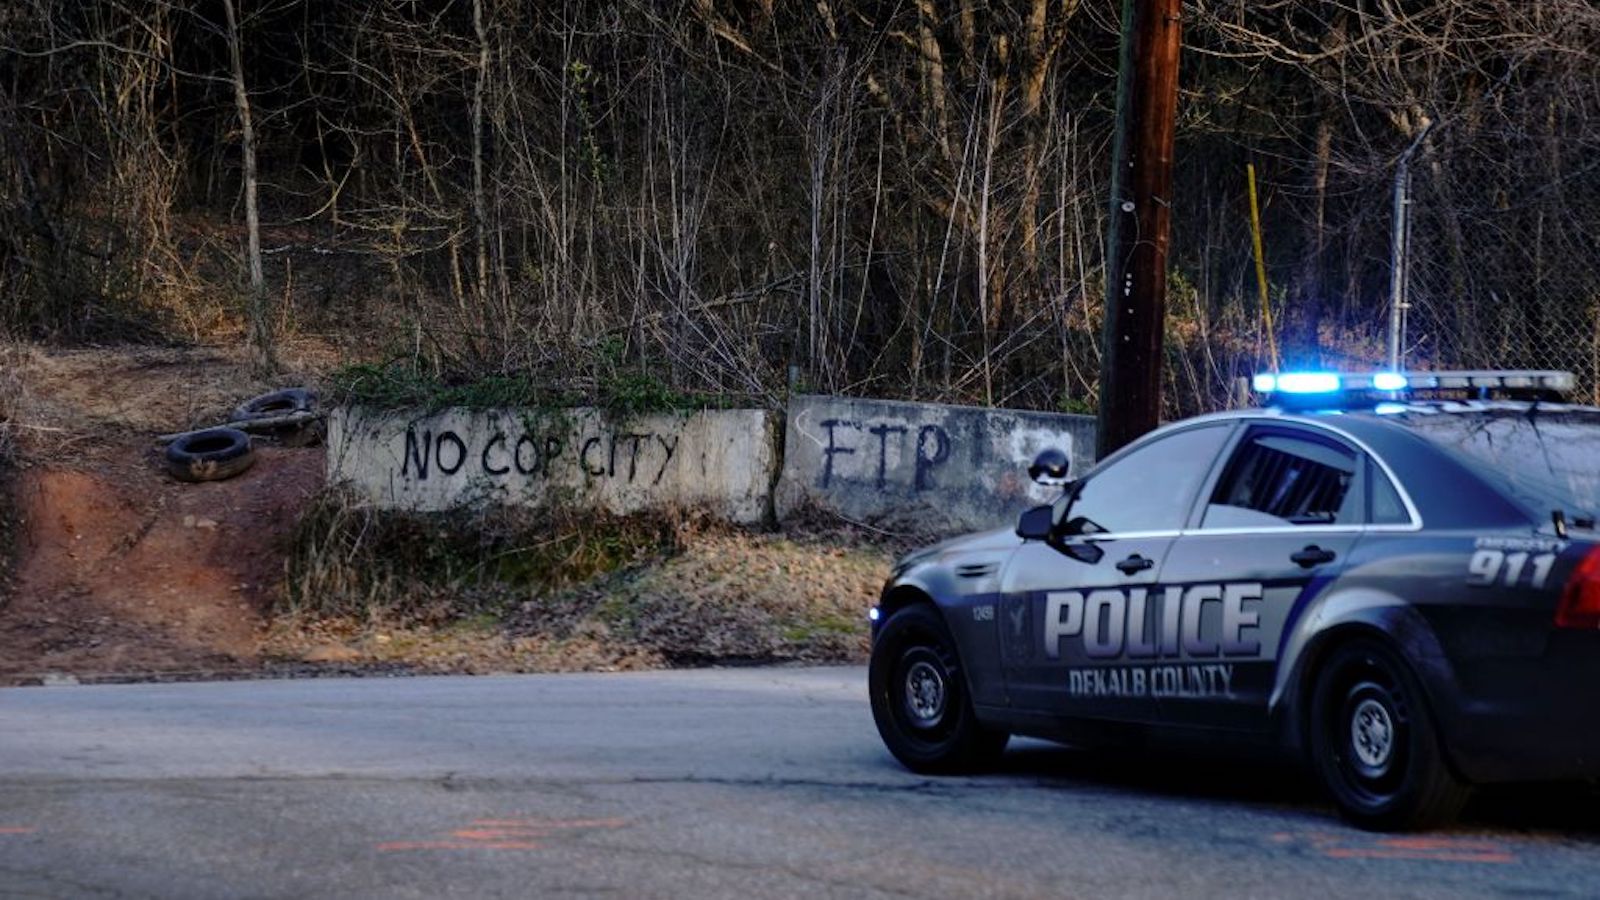 A police car near the site of Atlanta's proposed Cop City